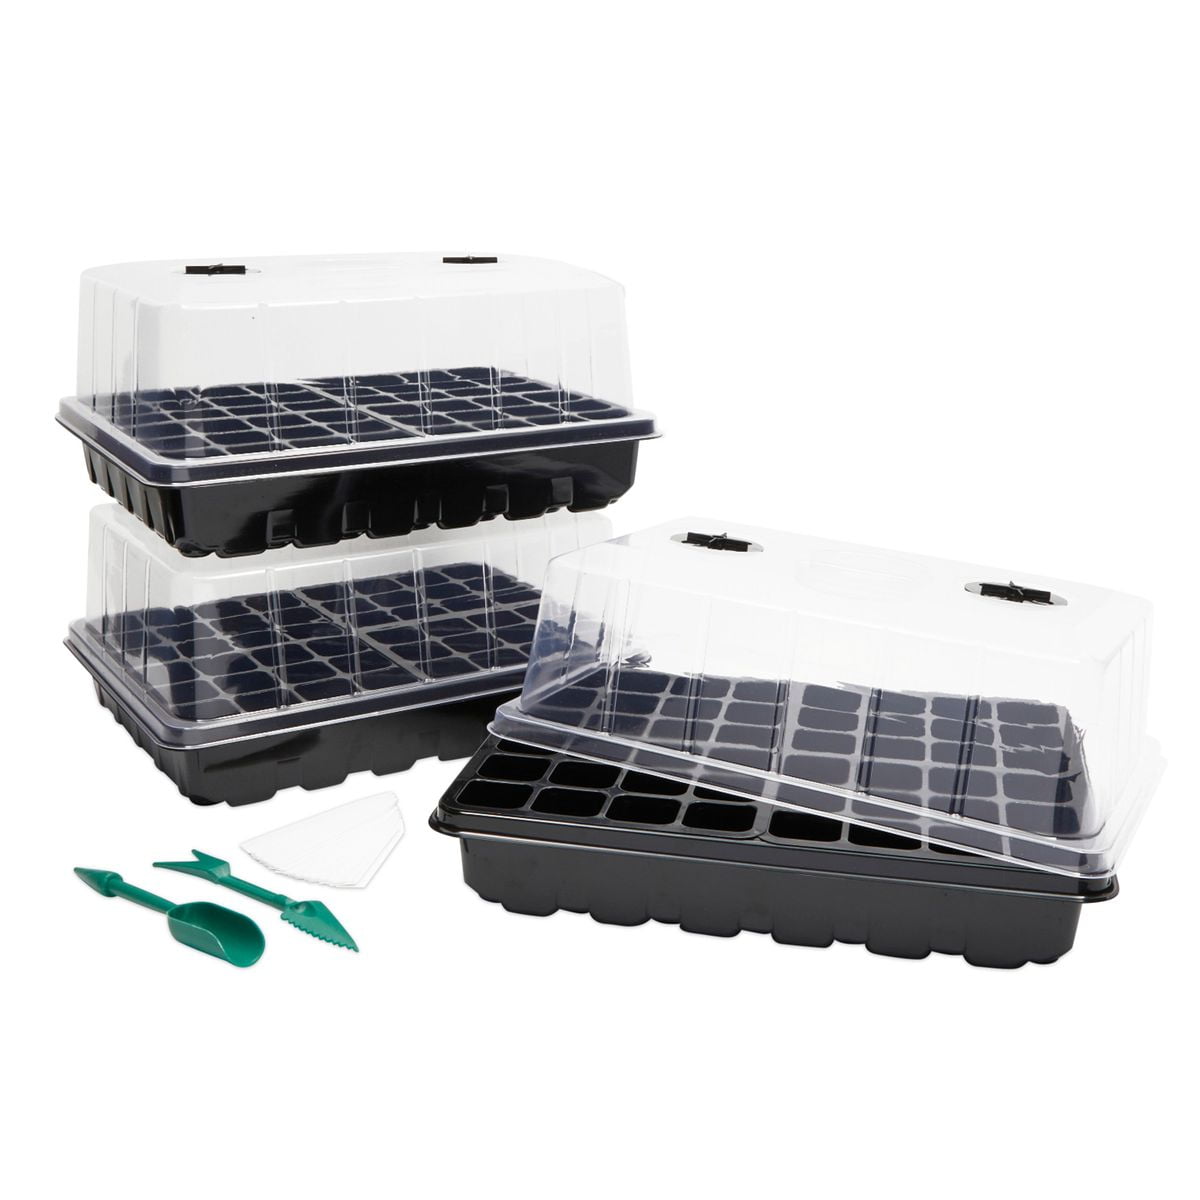 SEED STARTER PROPAGATION KIT TRAY 72 Cell Seedling Plant Clone Greenhouse Dome 